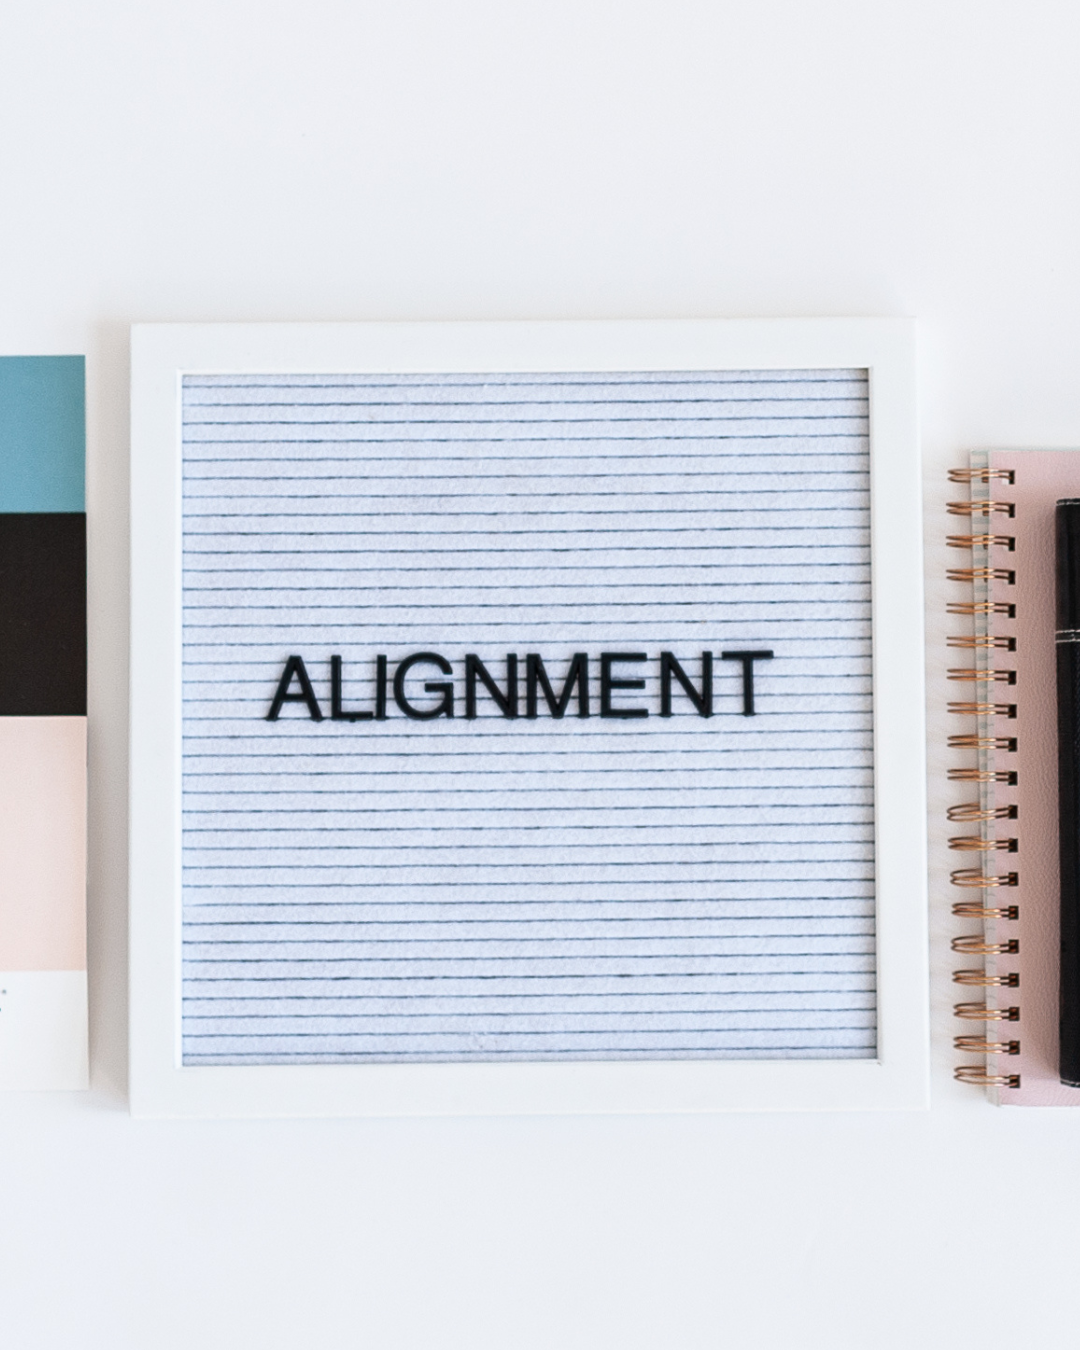 Alignment in your brand and business